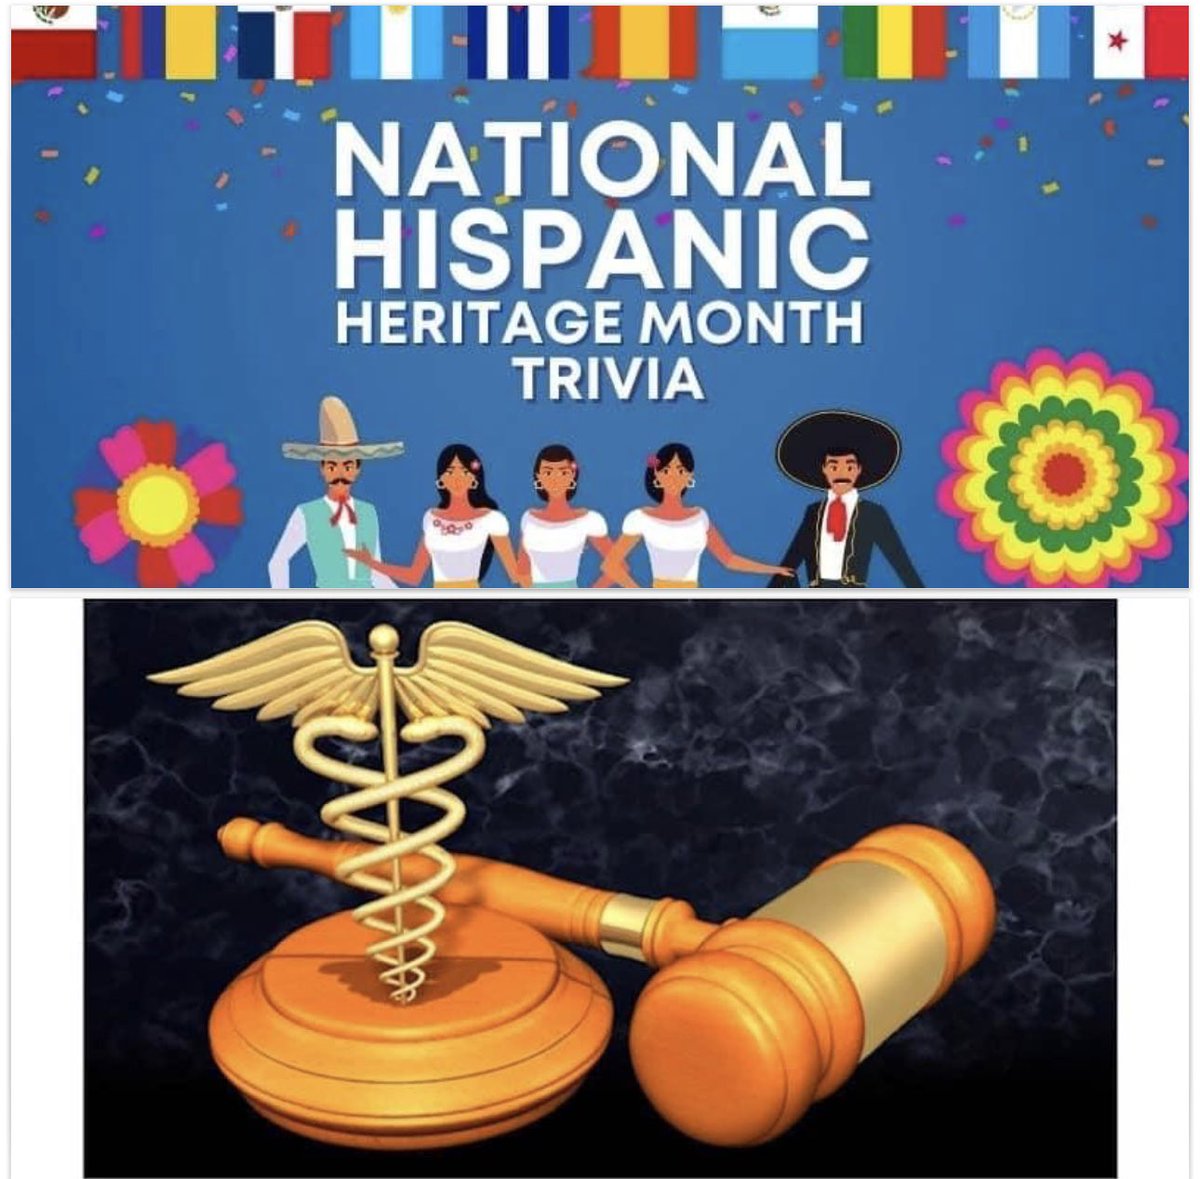 HISPANIC HERITAGE MONTH 2023
The last day of National Hispanic Heritage Month 2023 ends today. The United States is not producing enough physicians or lawyers to serve the country’s Latino population: lnkd.in/gZvxzBYF

#latinoeducation #latinoleaders #latinosunidos